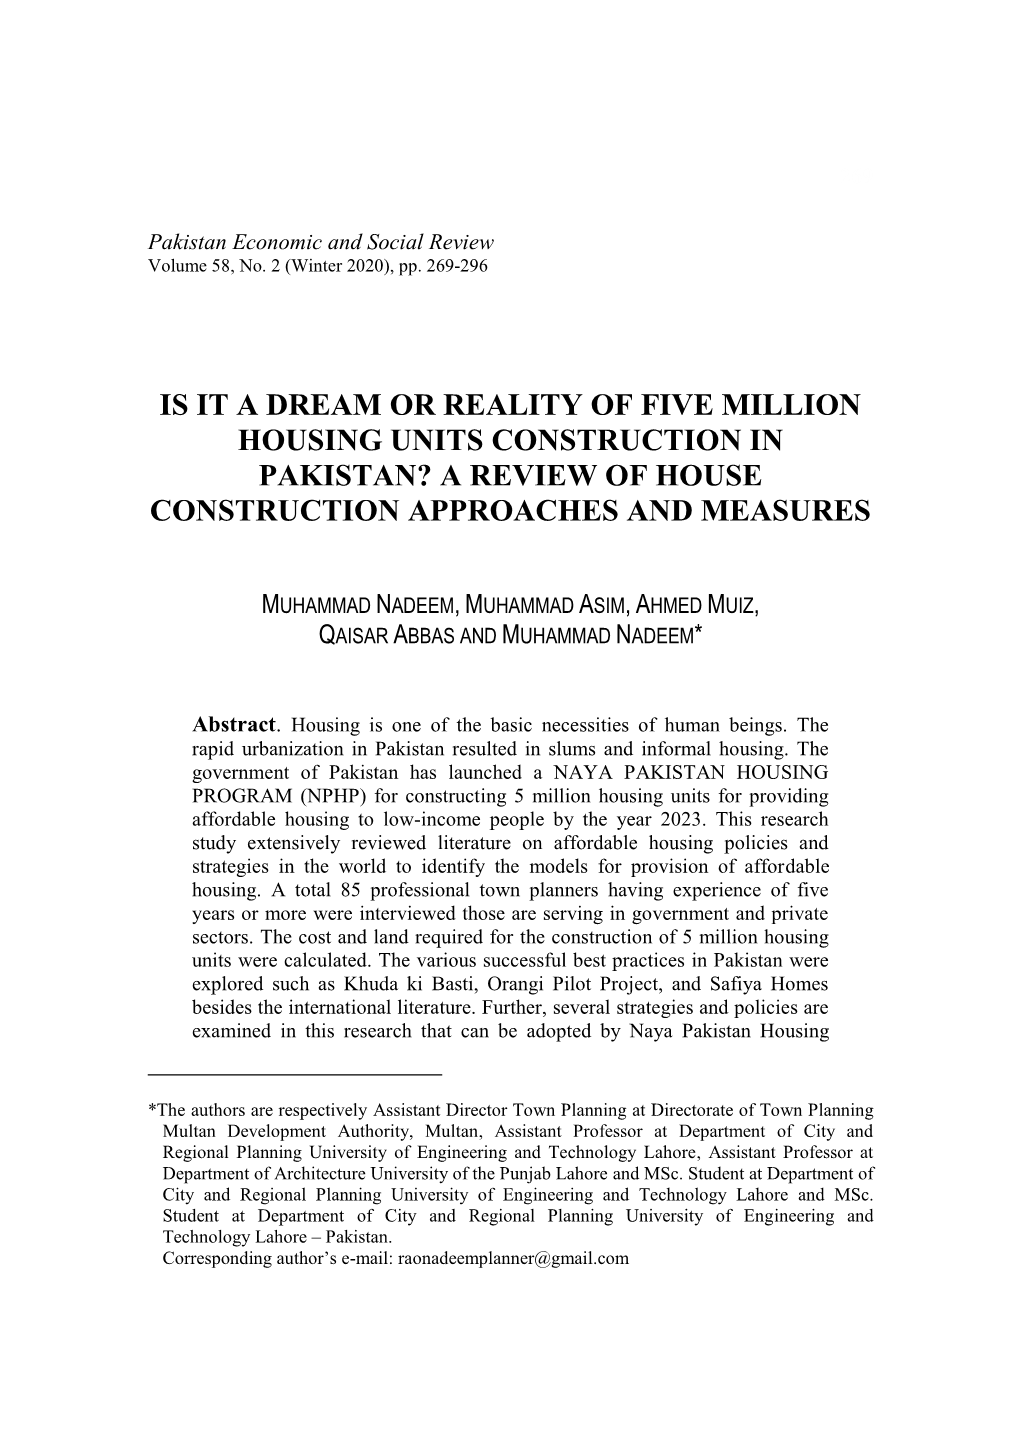 Is It a Dream Or Reality of Five Million Housing Units Construction in Pakistan? a Review of House Construction Approaches and Measures